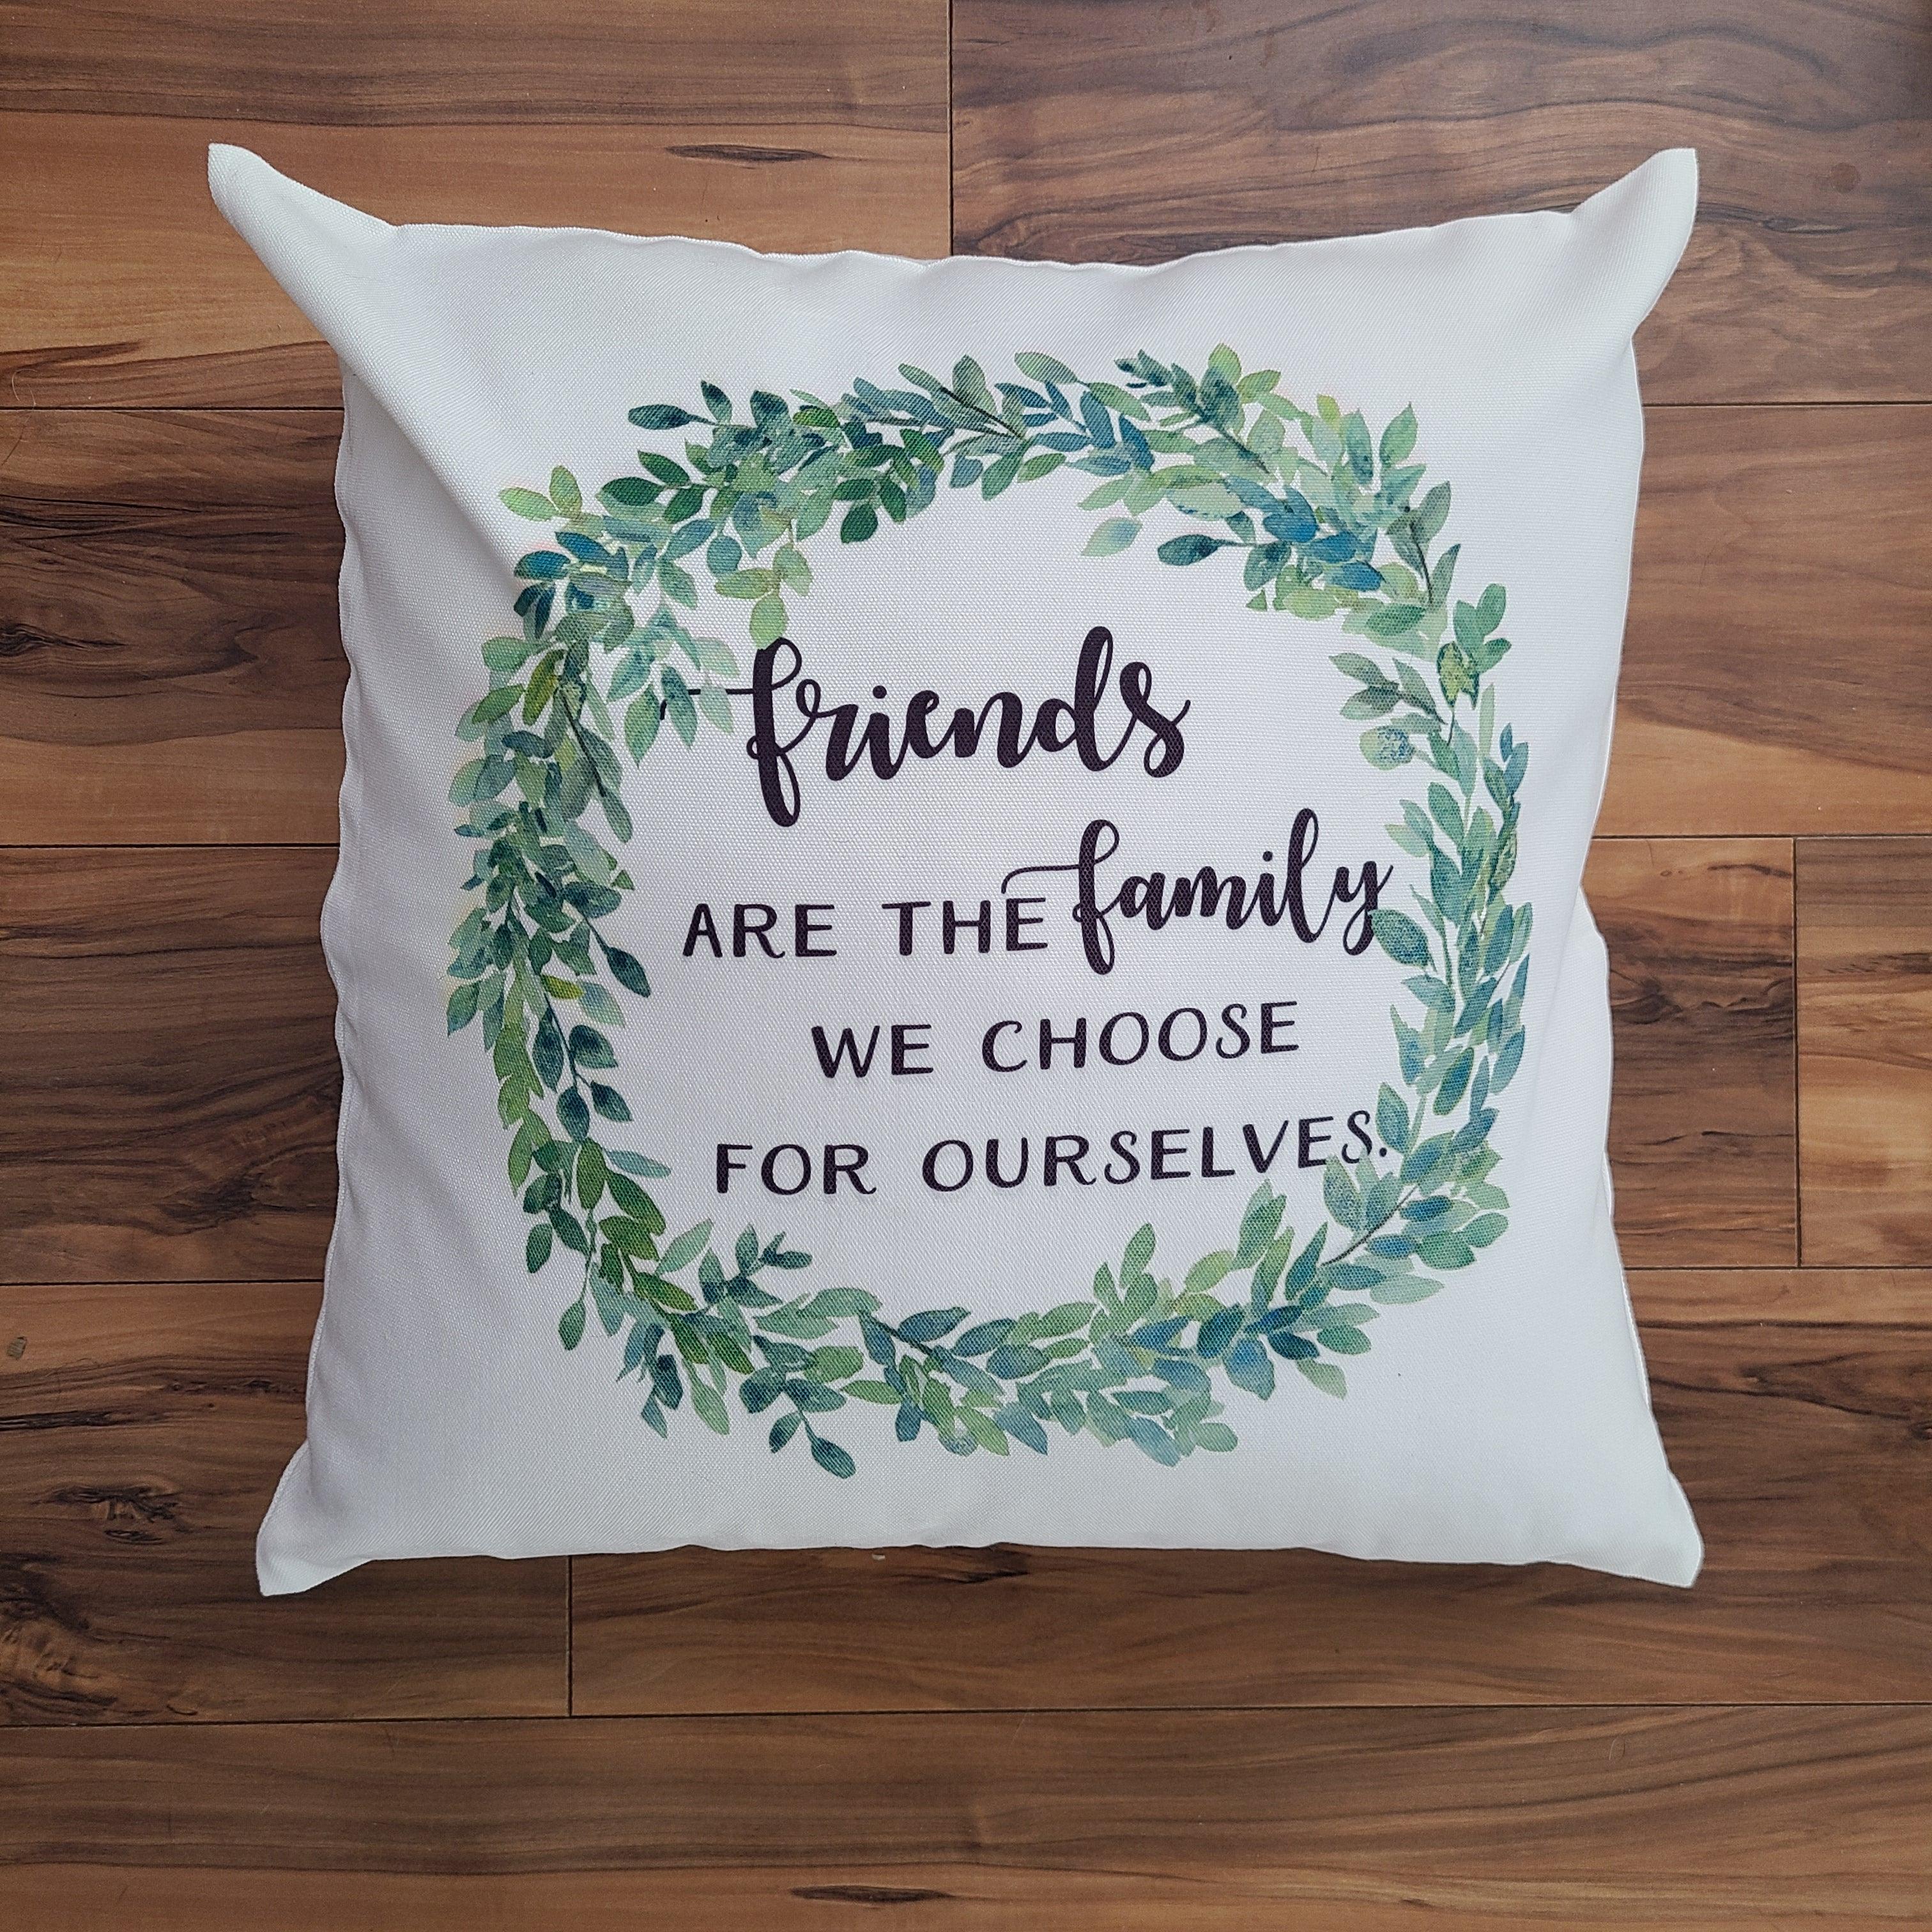 Friends are the Family we Choose Pillow - Greens and Blues Wreath